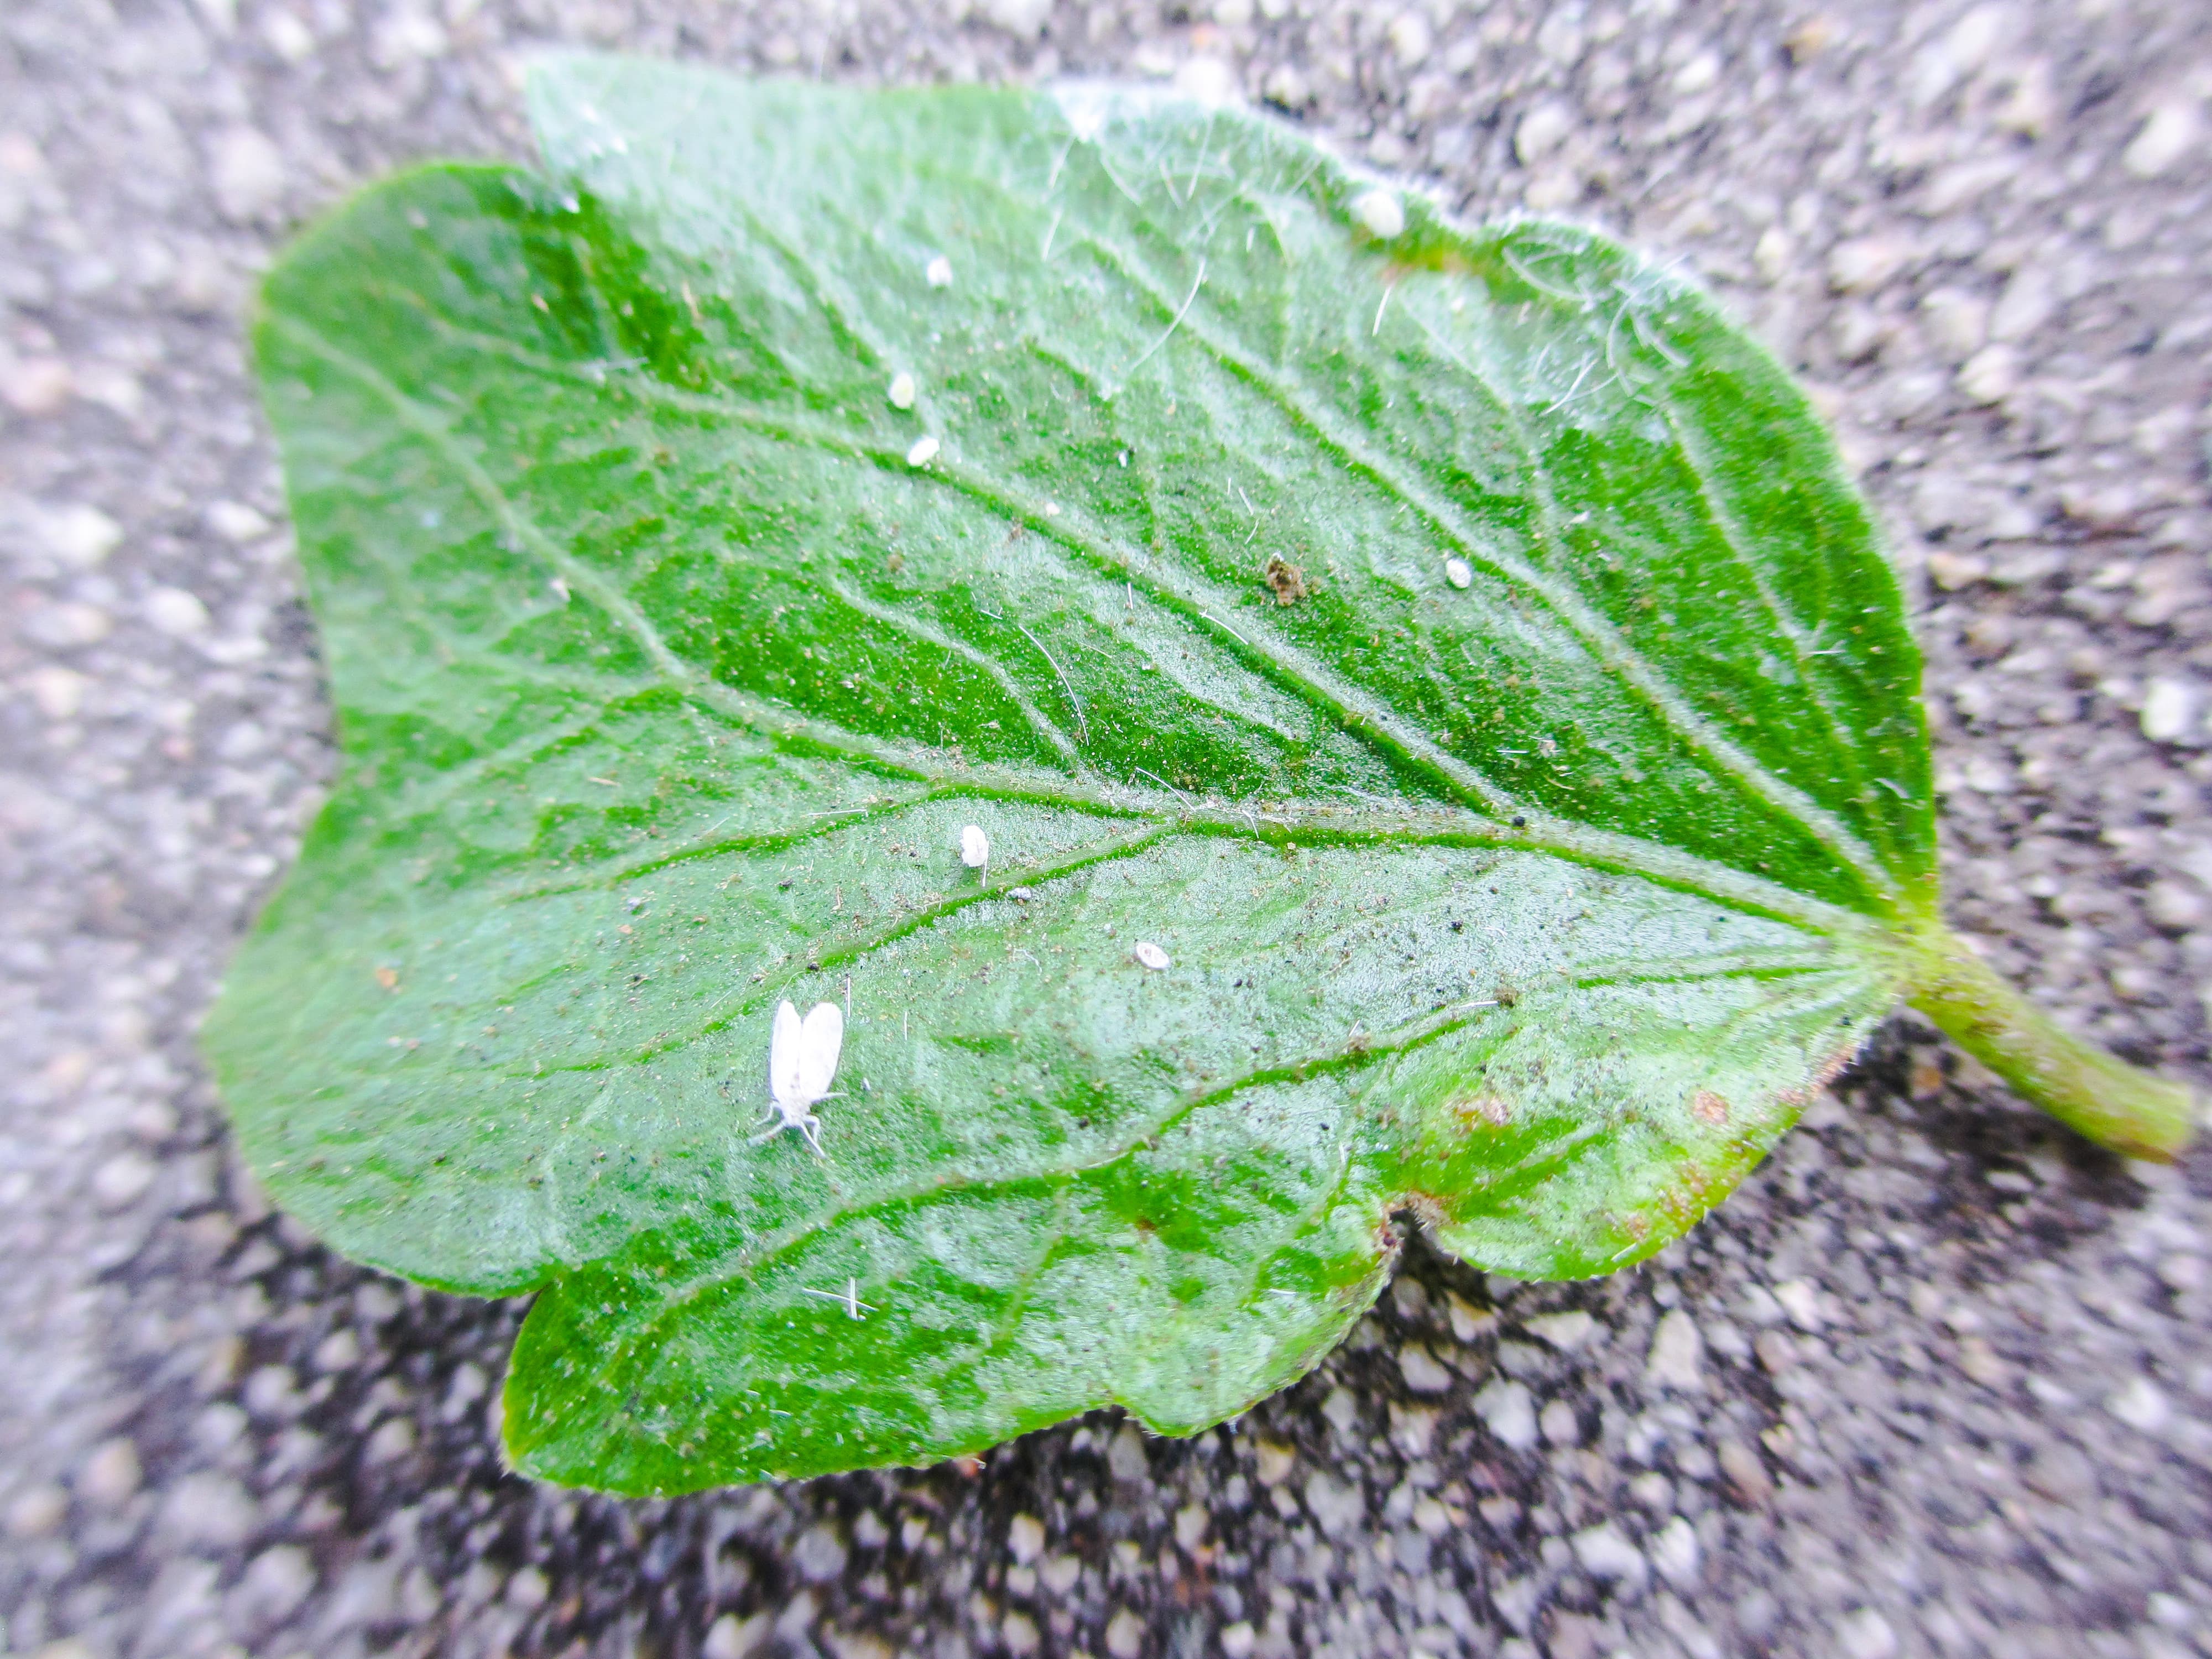 close up of whiteflies on a plant leaf